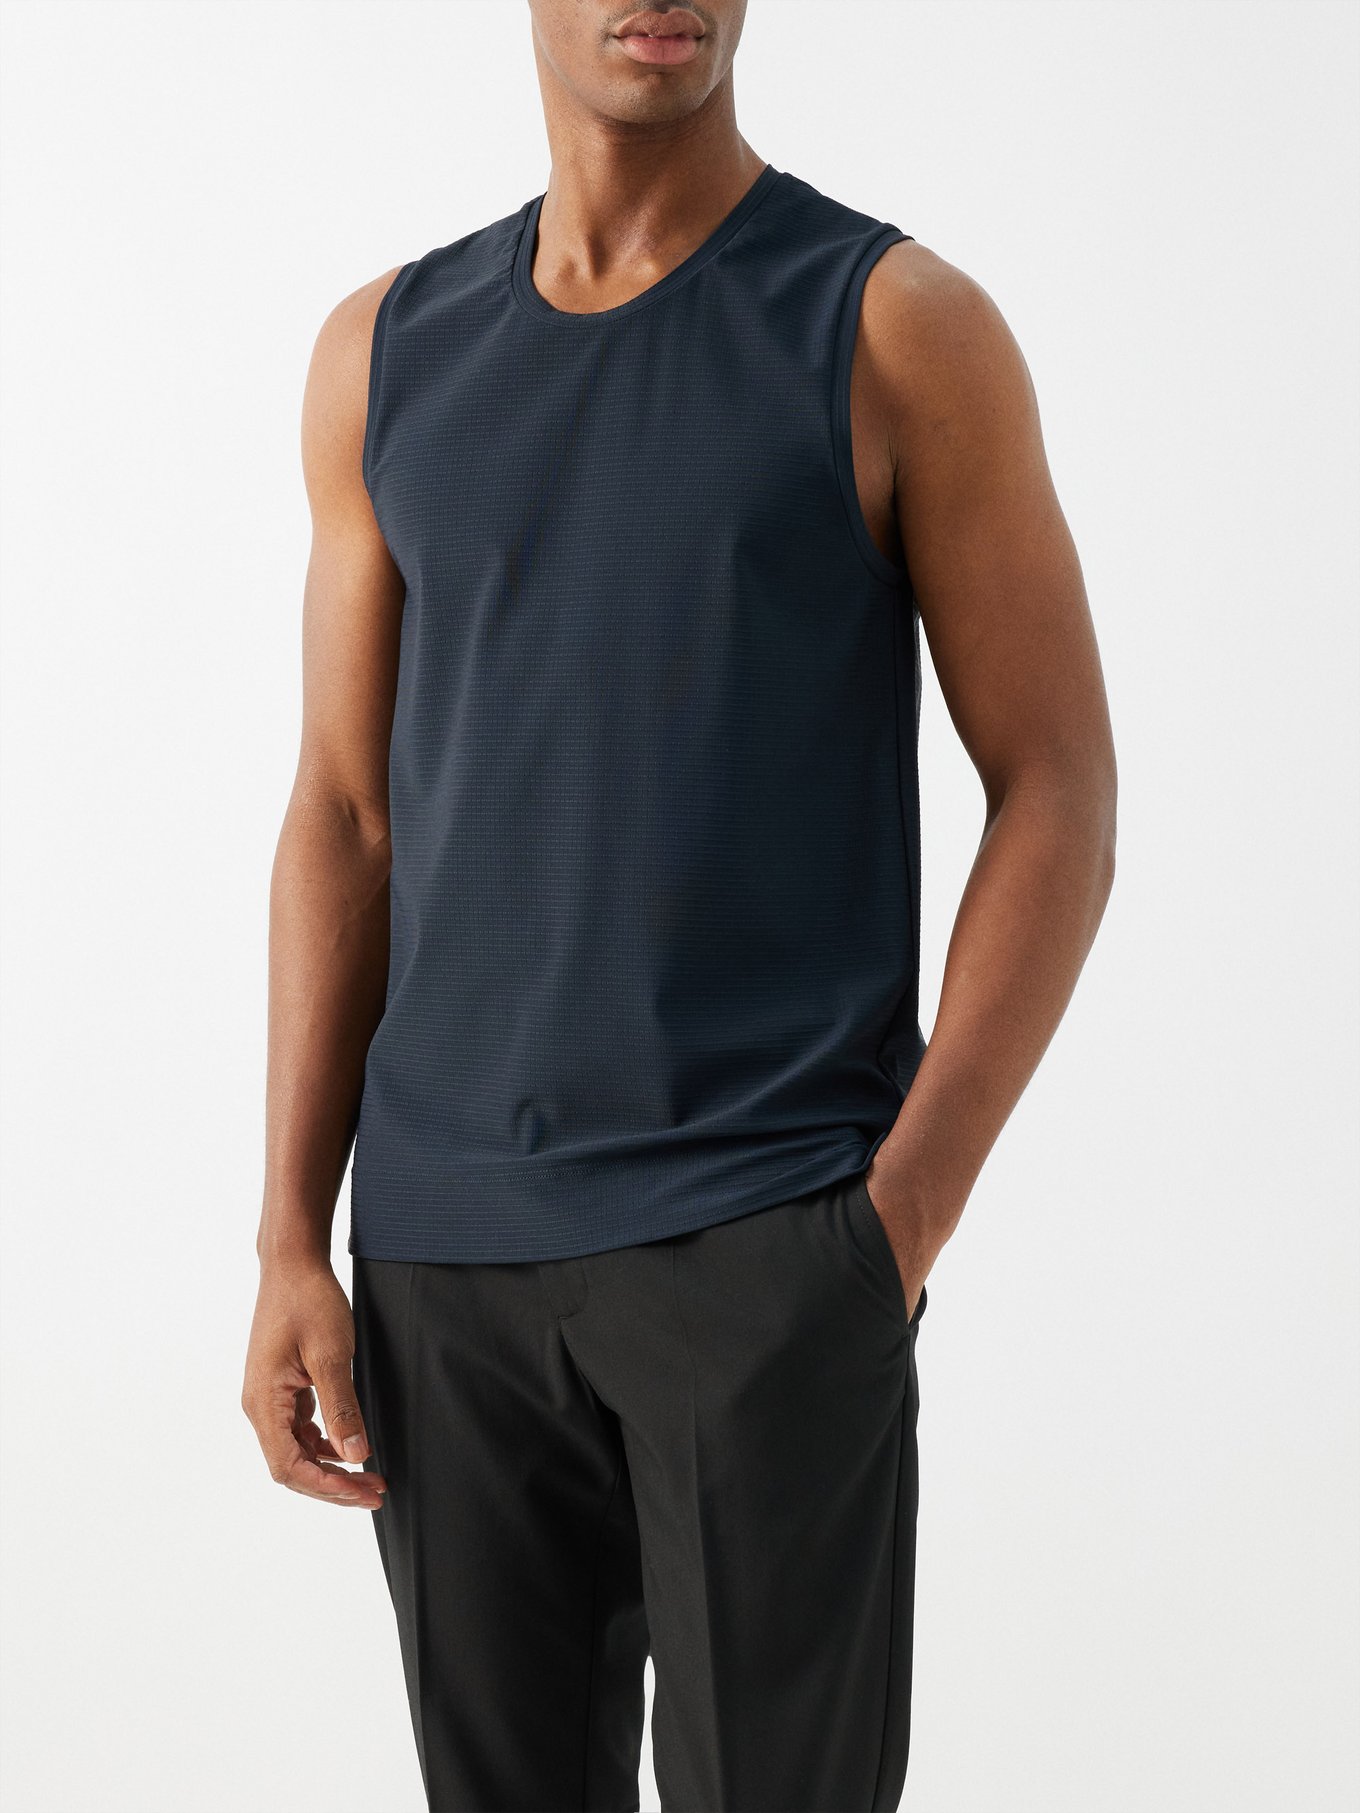 Navy Movement jersey tank top | Jacques | MATCHES UK